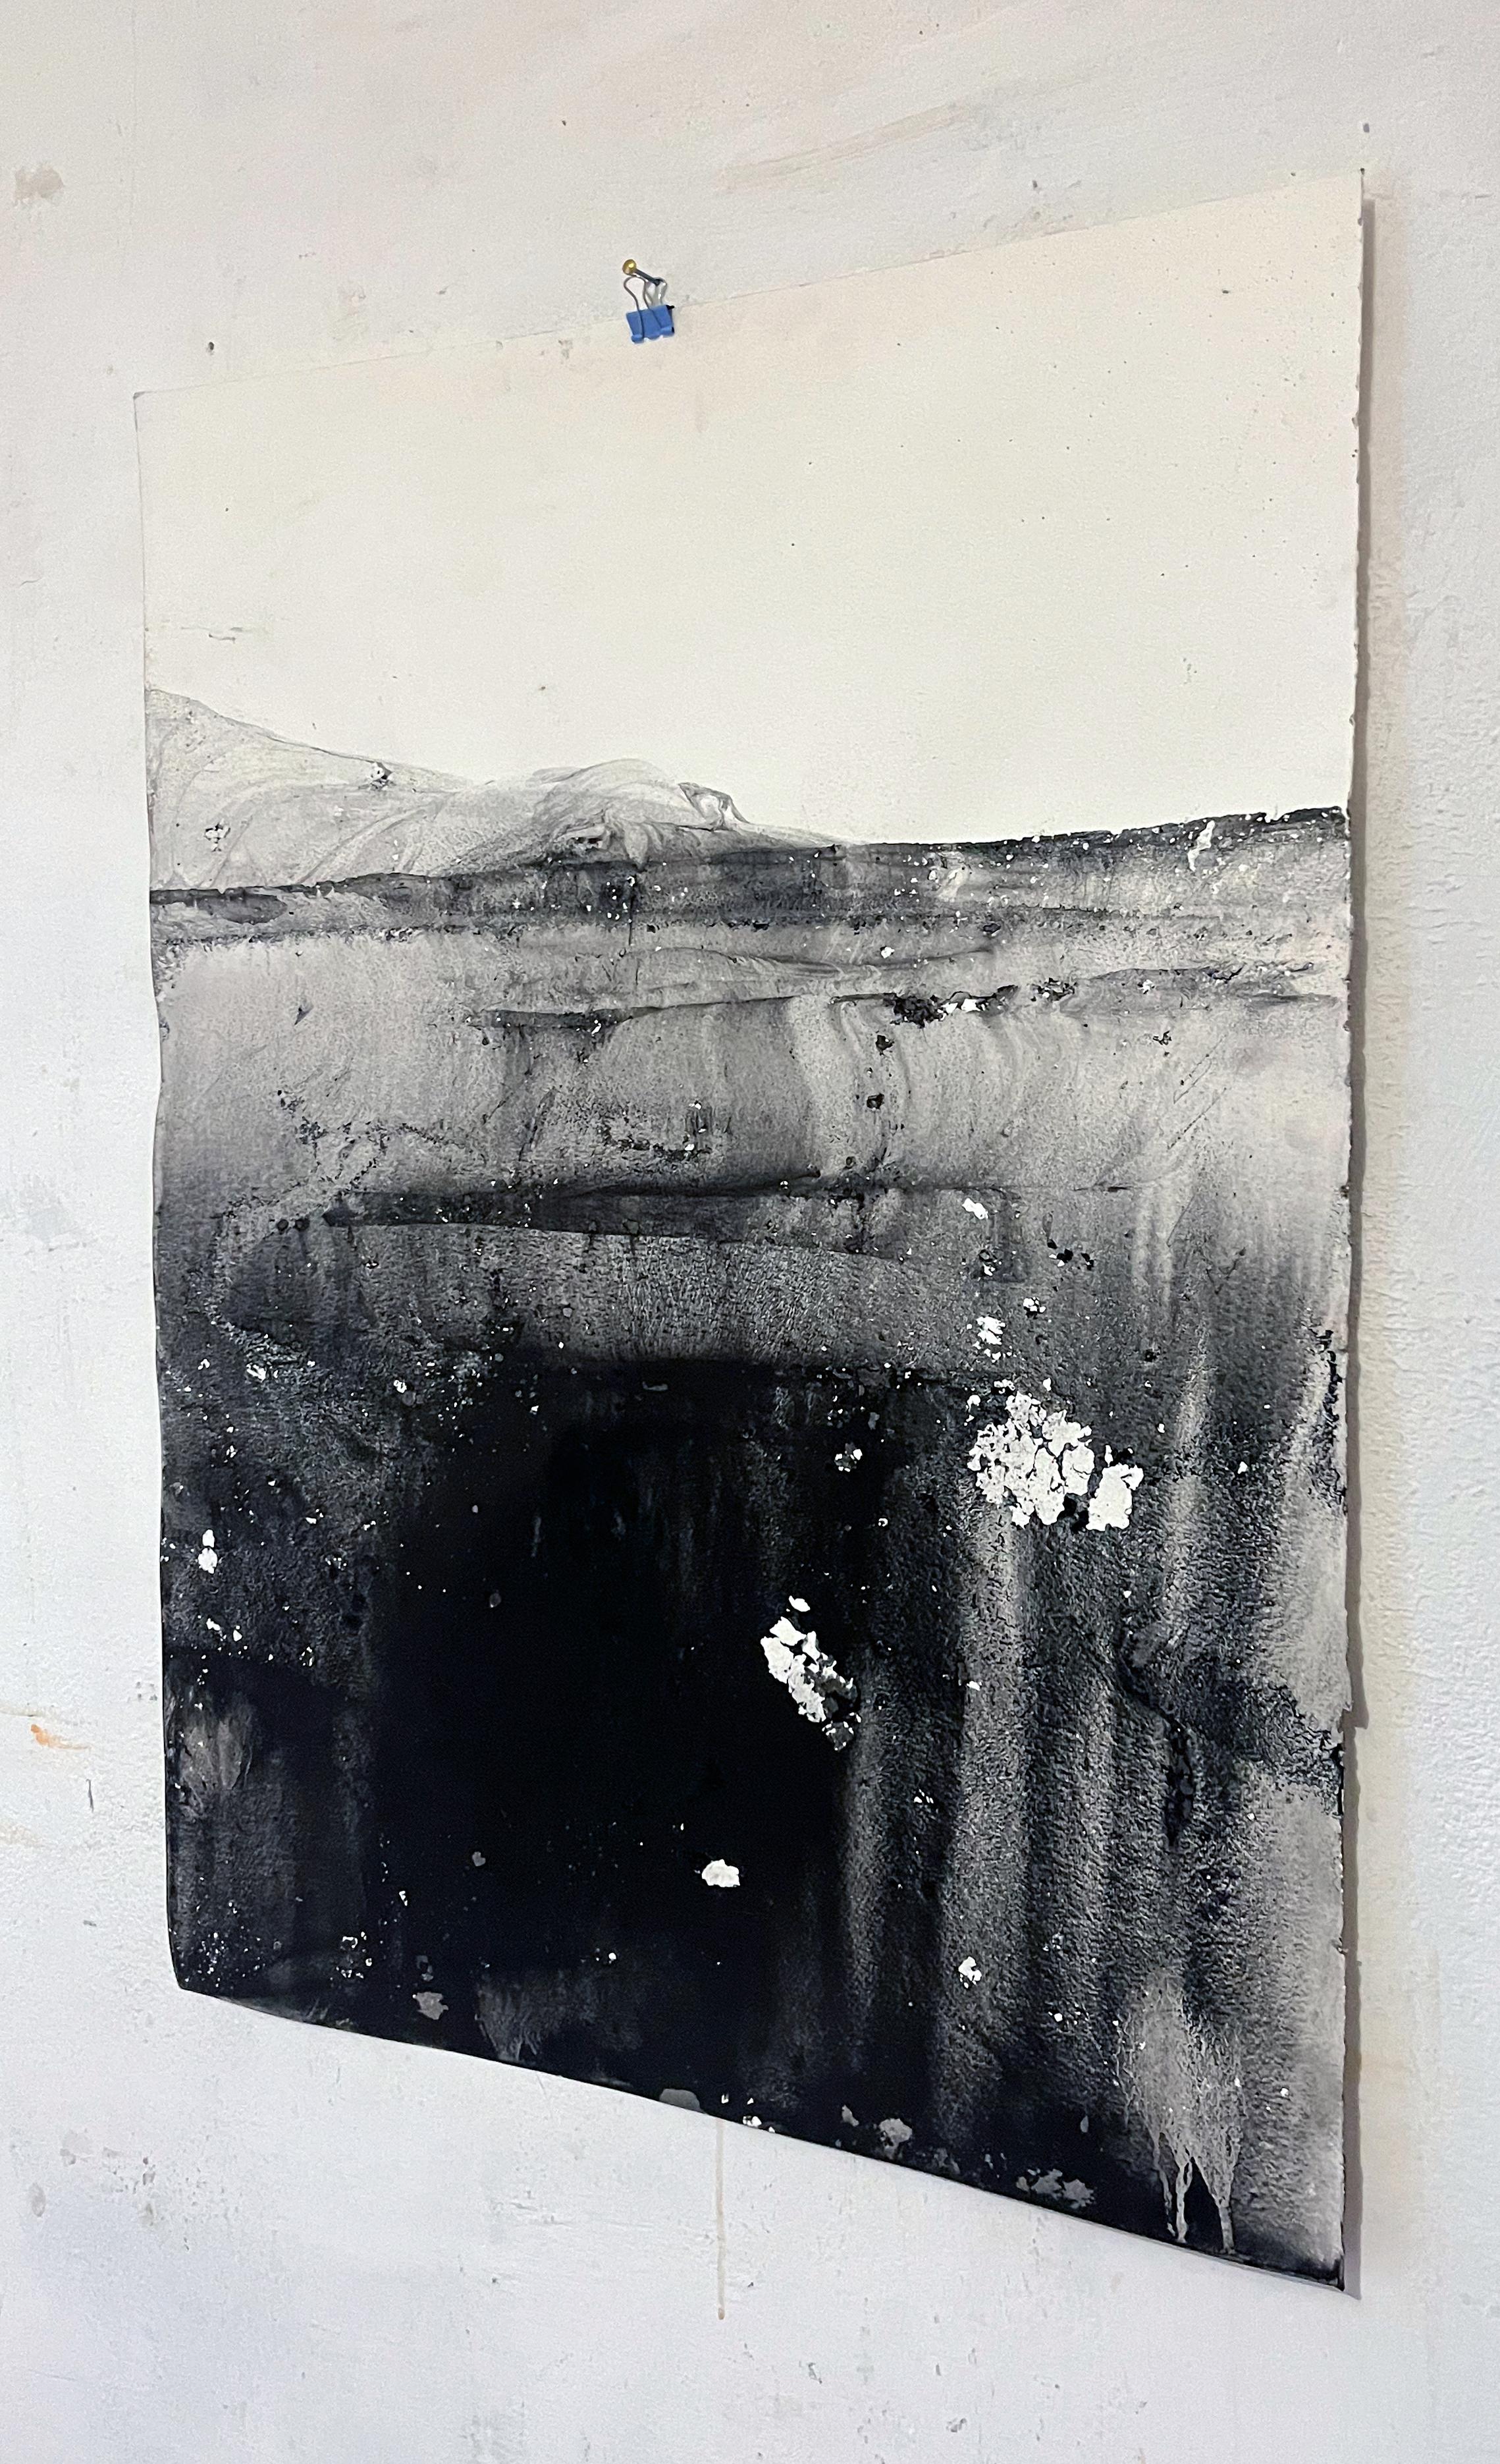 Landscape BW
 Charcoal on papers ( Canson Paper 300gr)
Origial drawing ,one of a kind
55x75 cm
2022

The drawing is shipped flat inside a cardboard clip, it is possible to buy the drawing already framed ready to hang
as in photo

Marilina Marchica,